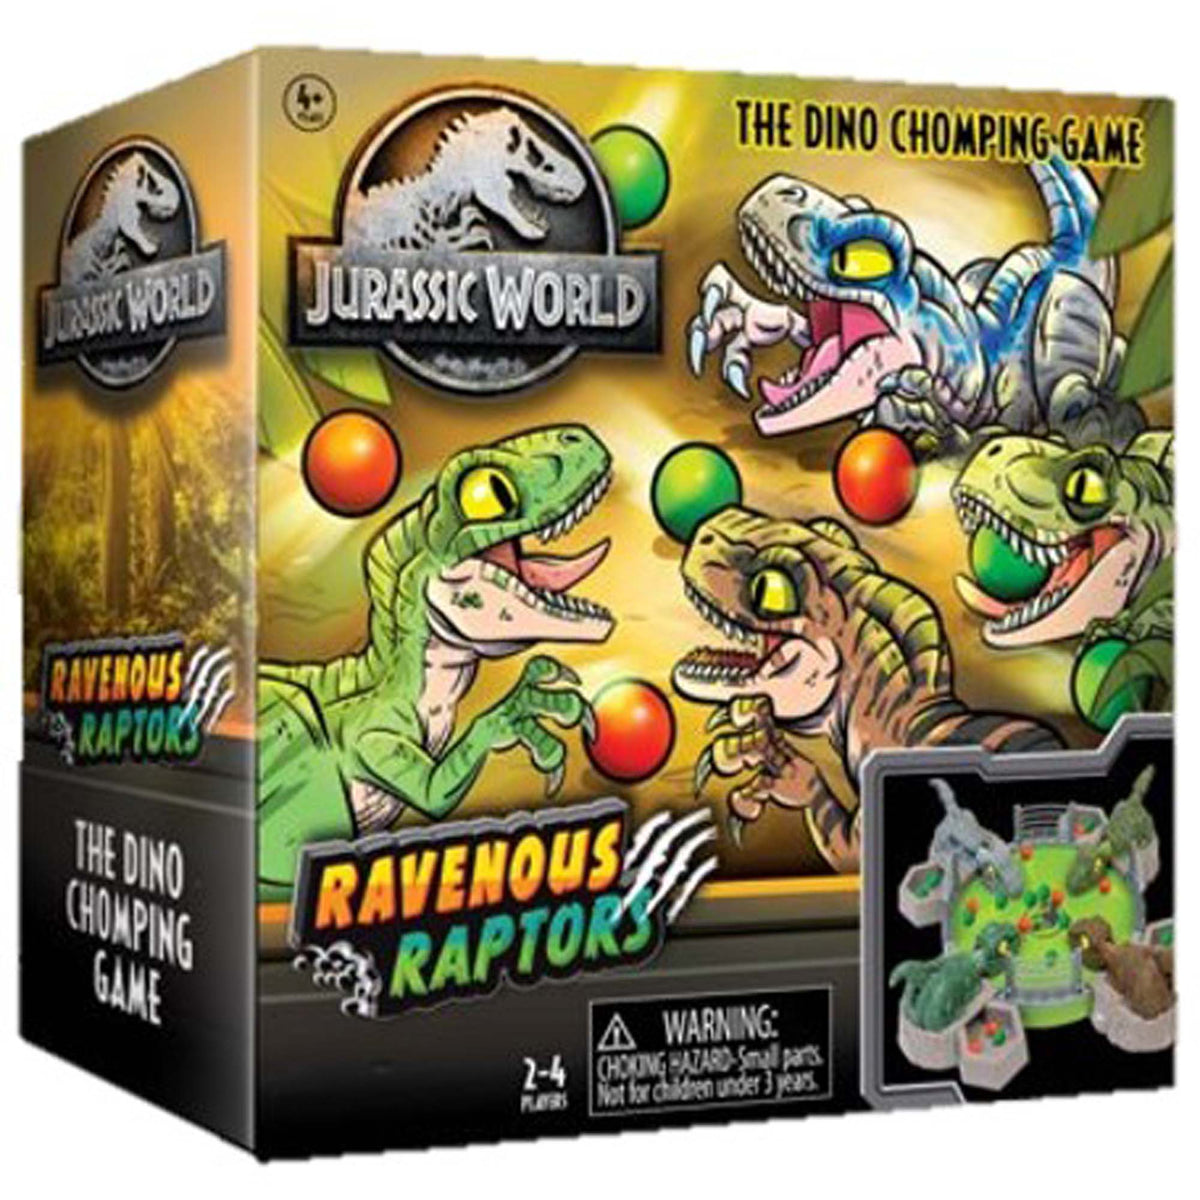 RED PLANET GROUP Toys & Games Jurassic World Ravenous Raptors Game, 1 Count